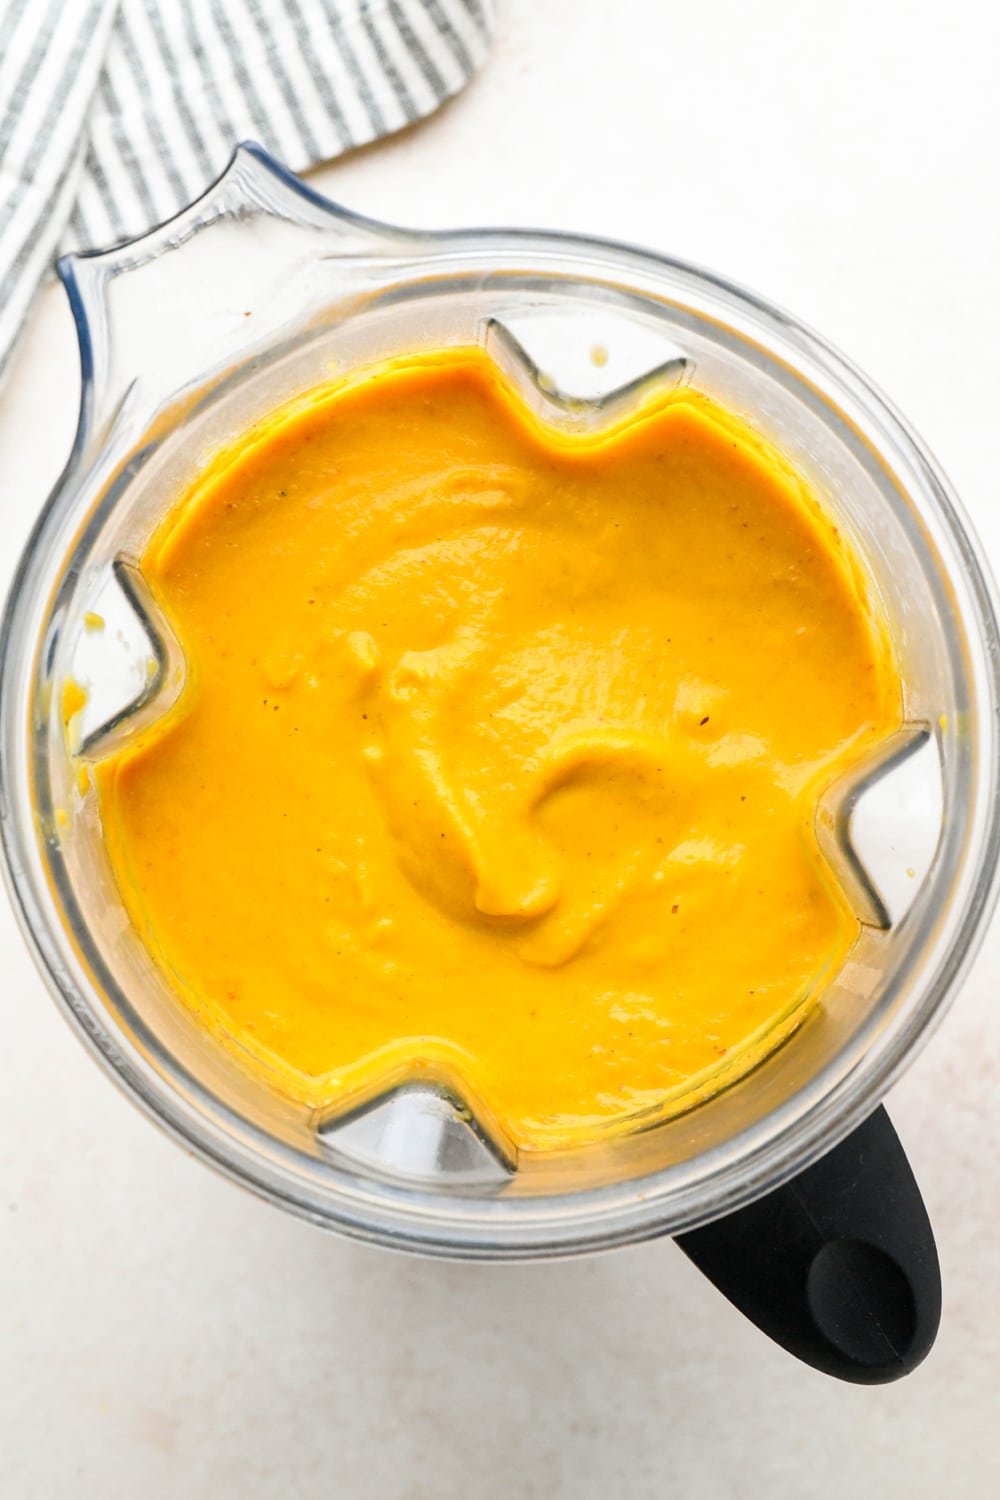 How to make Dairy Free Pumpkin Carrot Soup: Soup in the blender after blending.